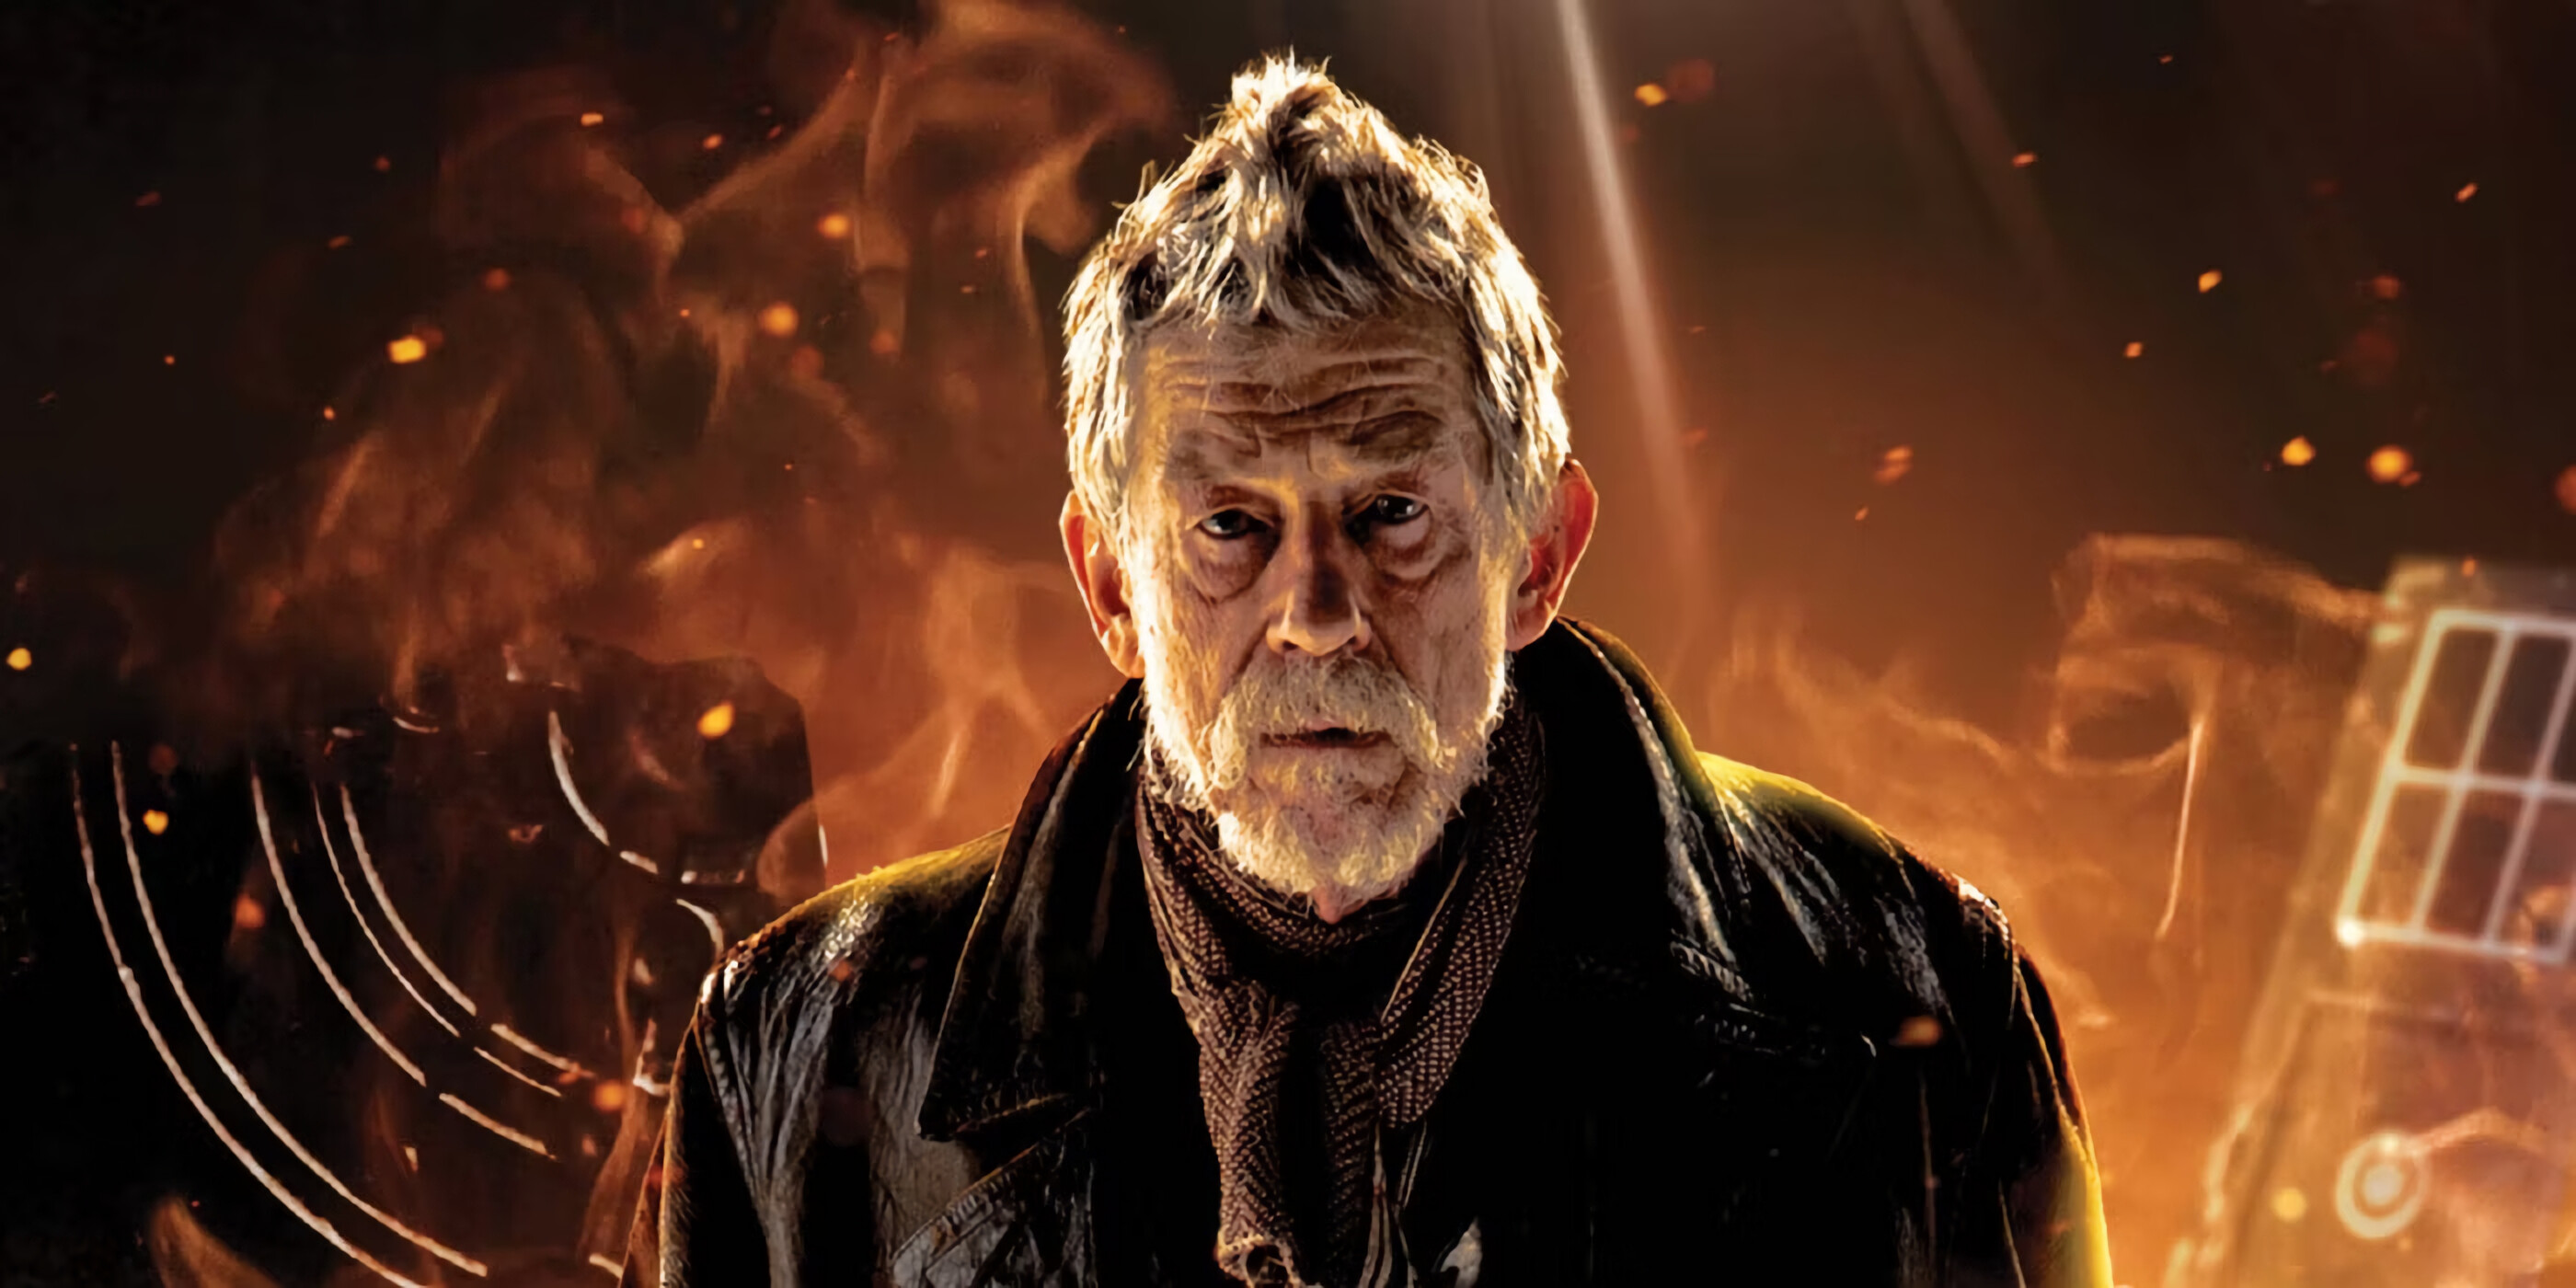 Doctor Who, John Hurt portrayal, Time travel adventures, Aliens and monsters, 2800x1400 Dual Screen Desktop